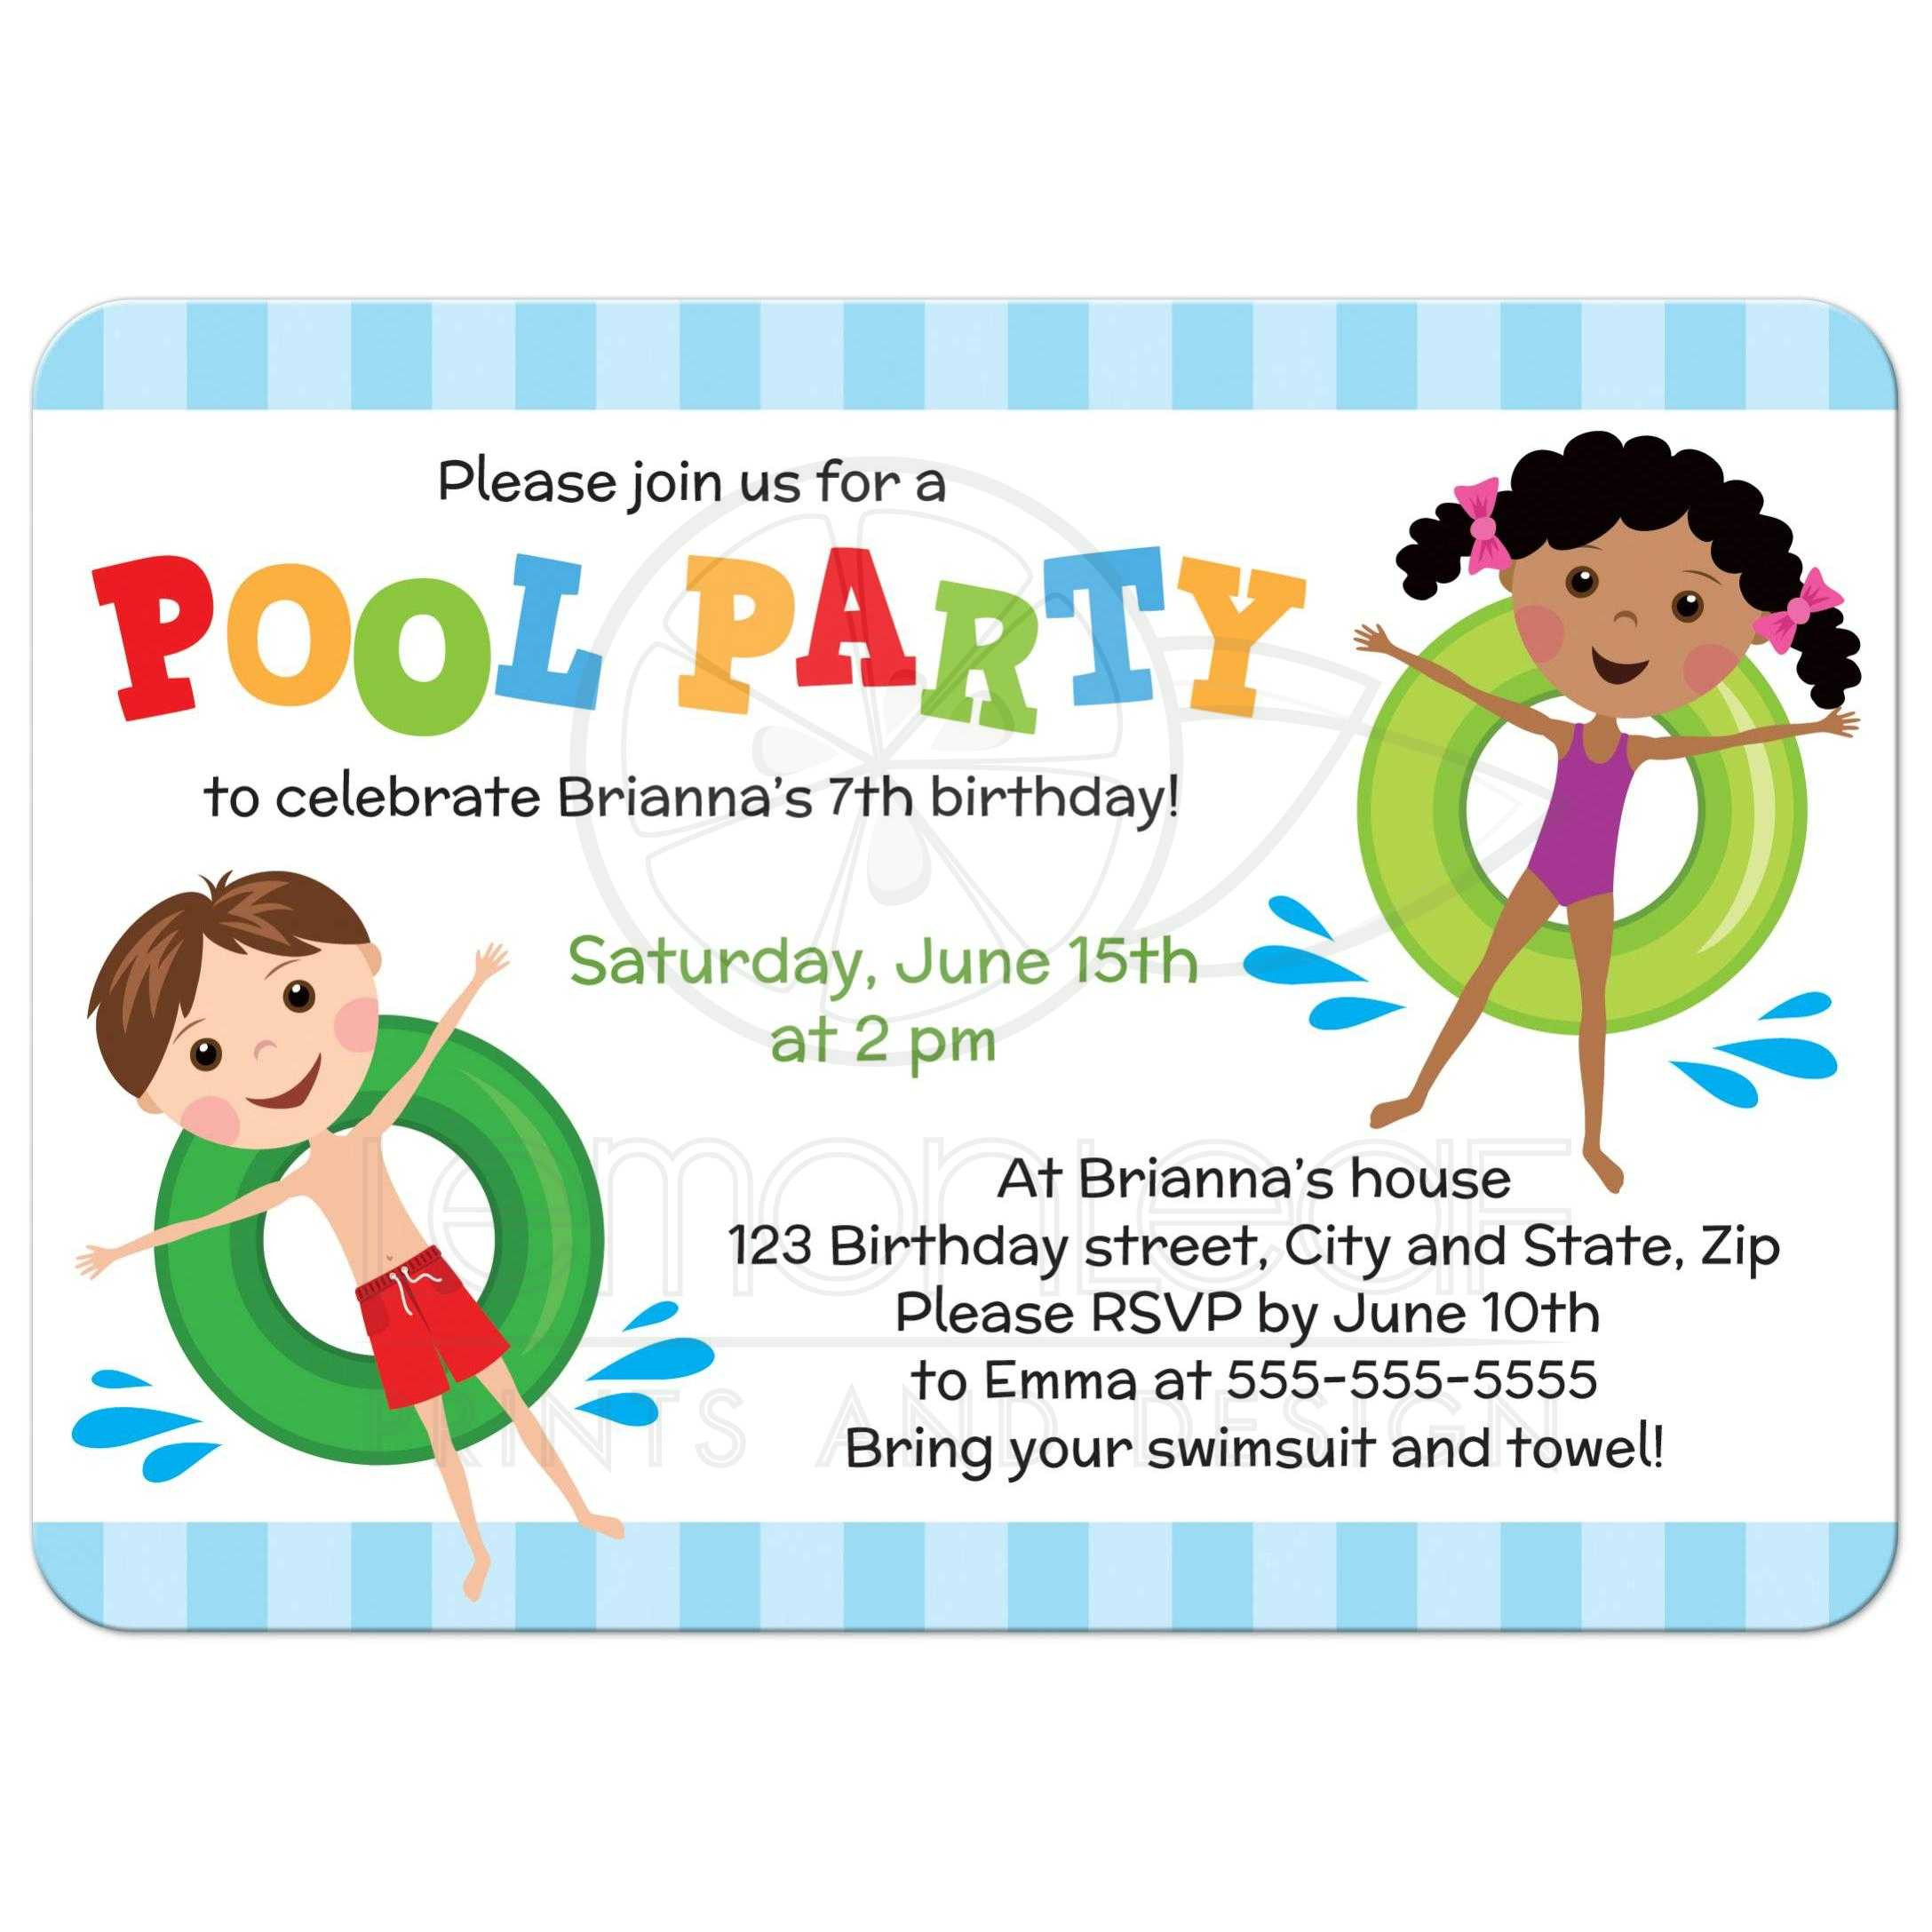 Kids Birthday Party Invitation
 Pool birthday party invitation for kids boy and girl on